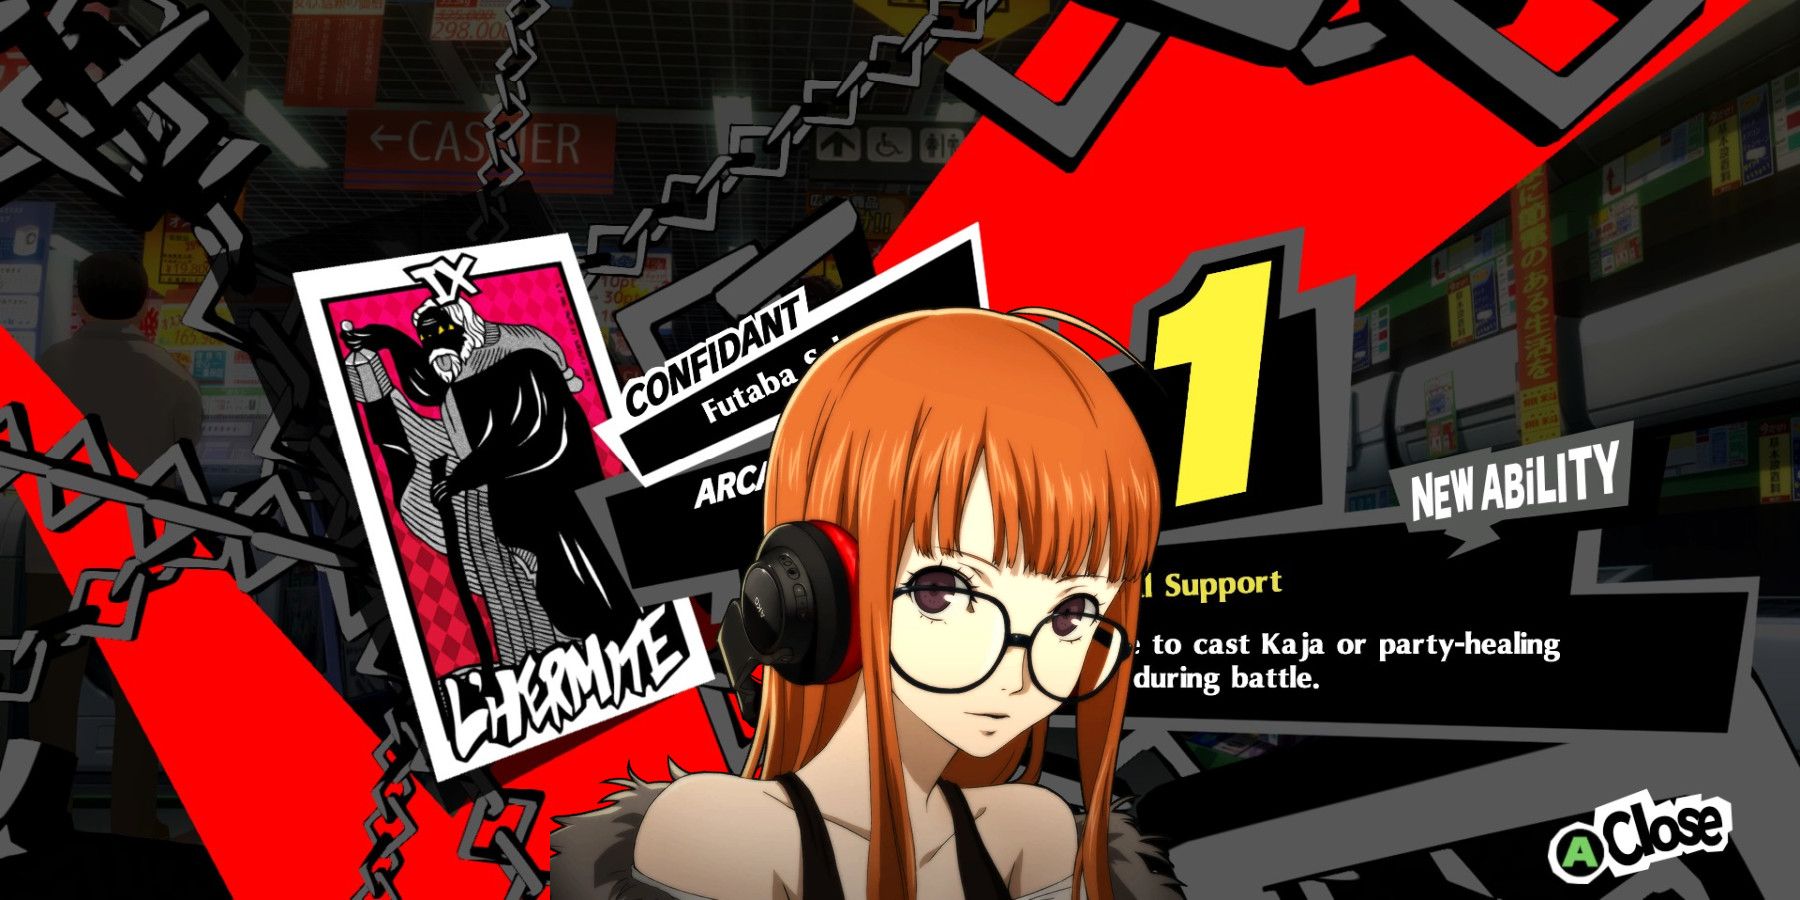 Persona 5 Royal: How to Spend Your Time Effectively - KeenGamer